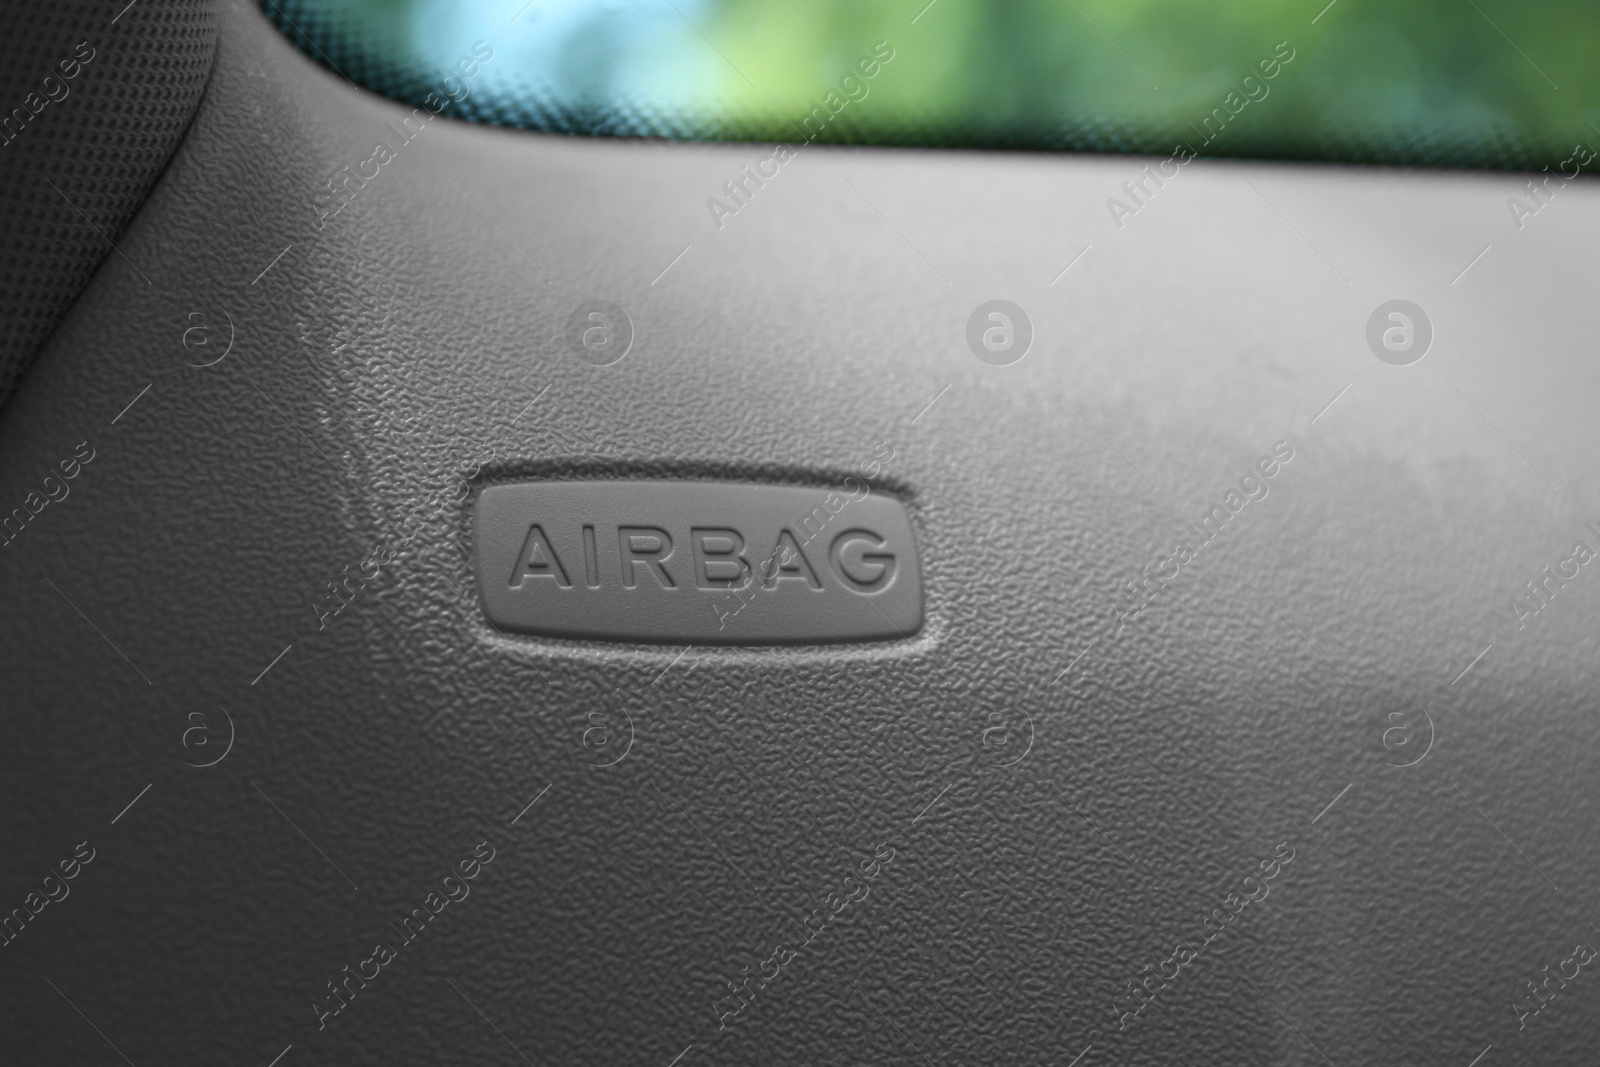 Photo of Safety airbag sign on door in car, closeup